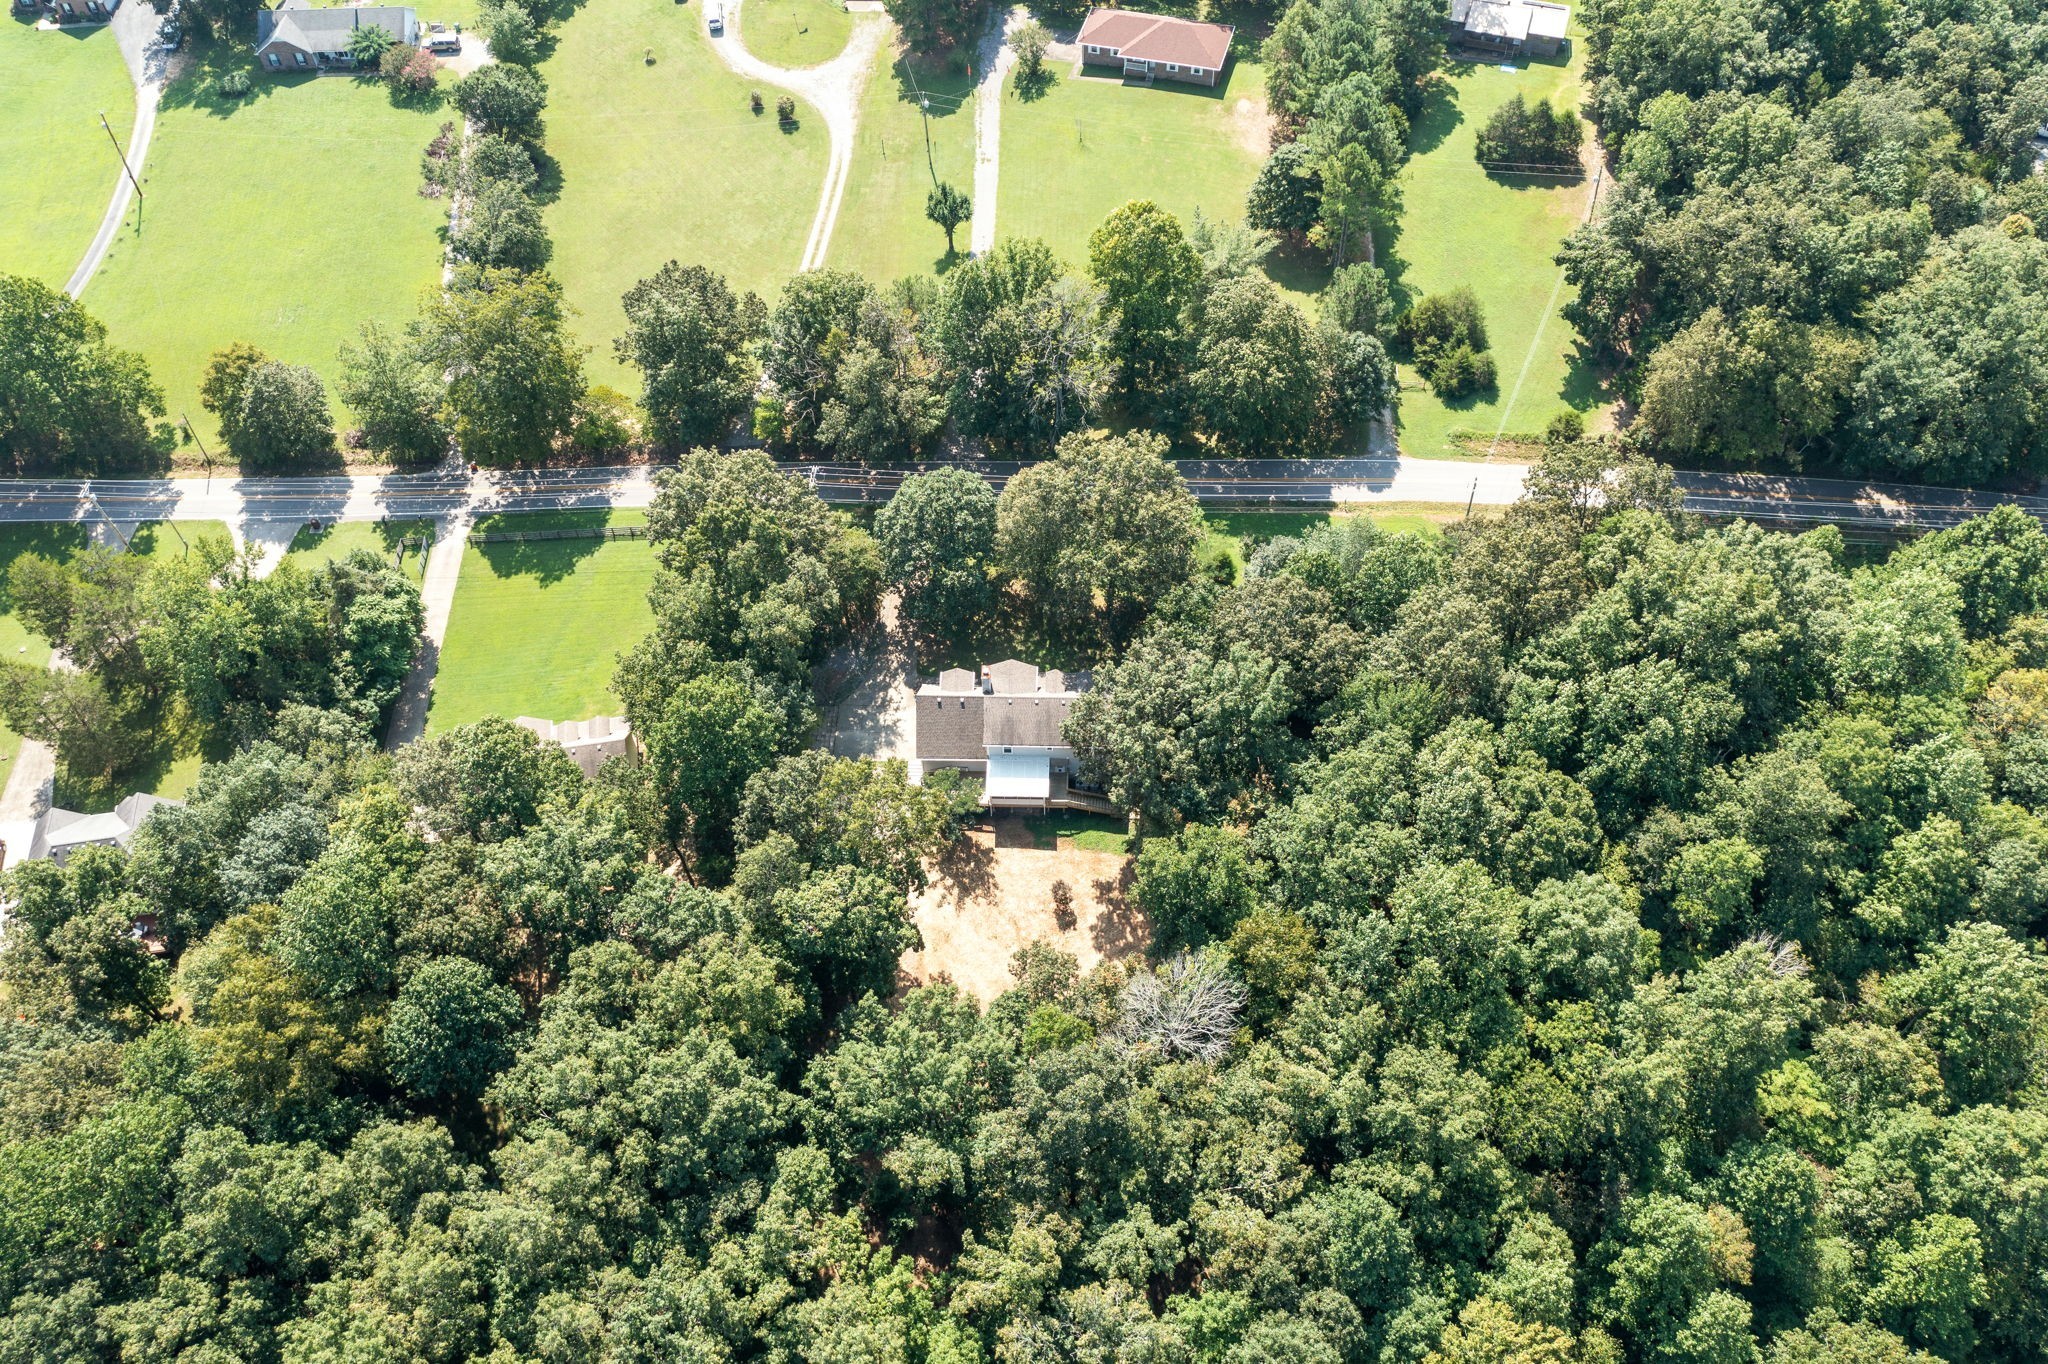 an aerial view of residential houses with outdoor space and trees all around